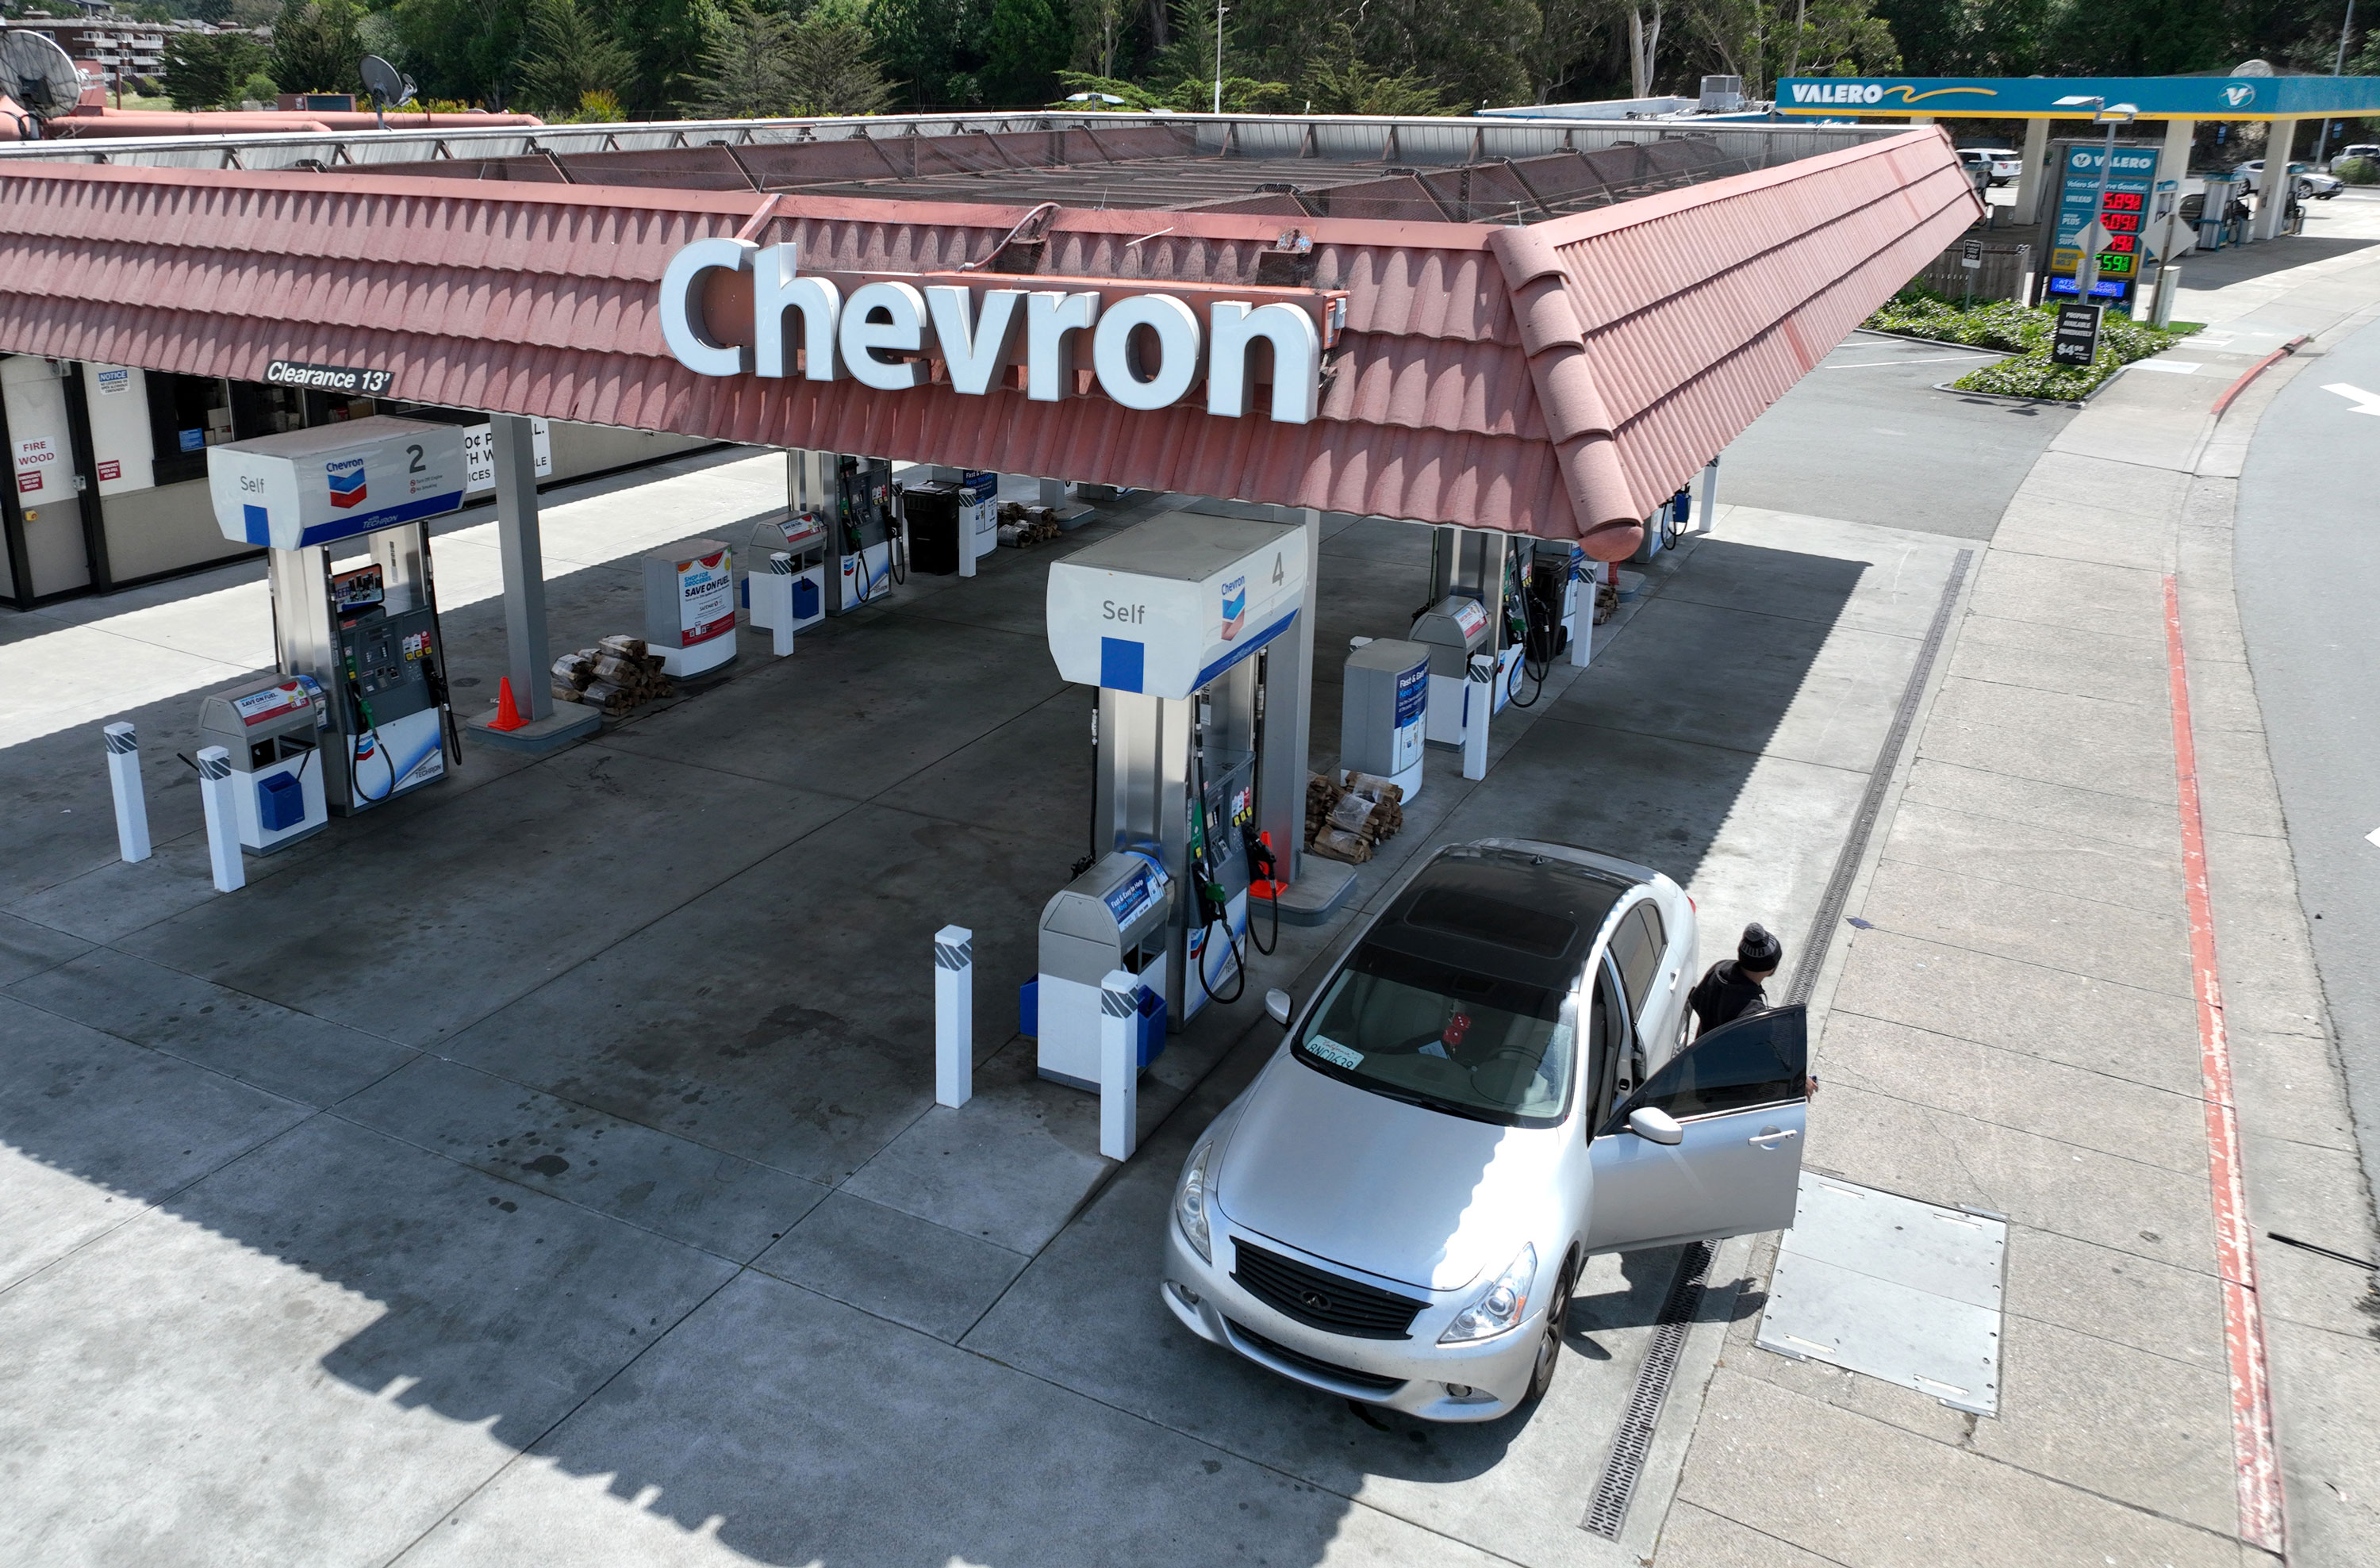 In an aerial view, a customer prepares to pump gas into his vehicle at a Chevron gas station on Friday, April 29, in Mill Valley, California.